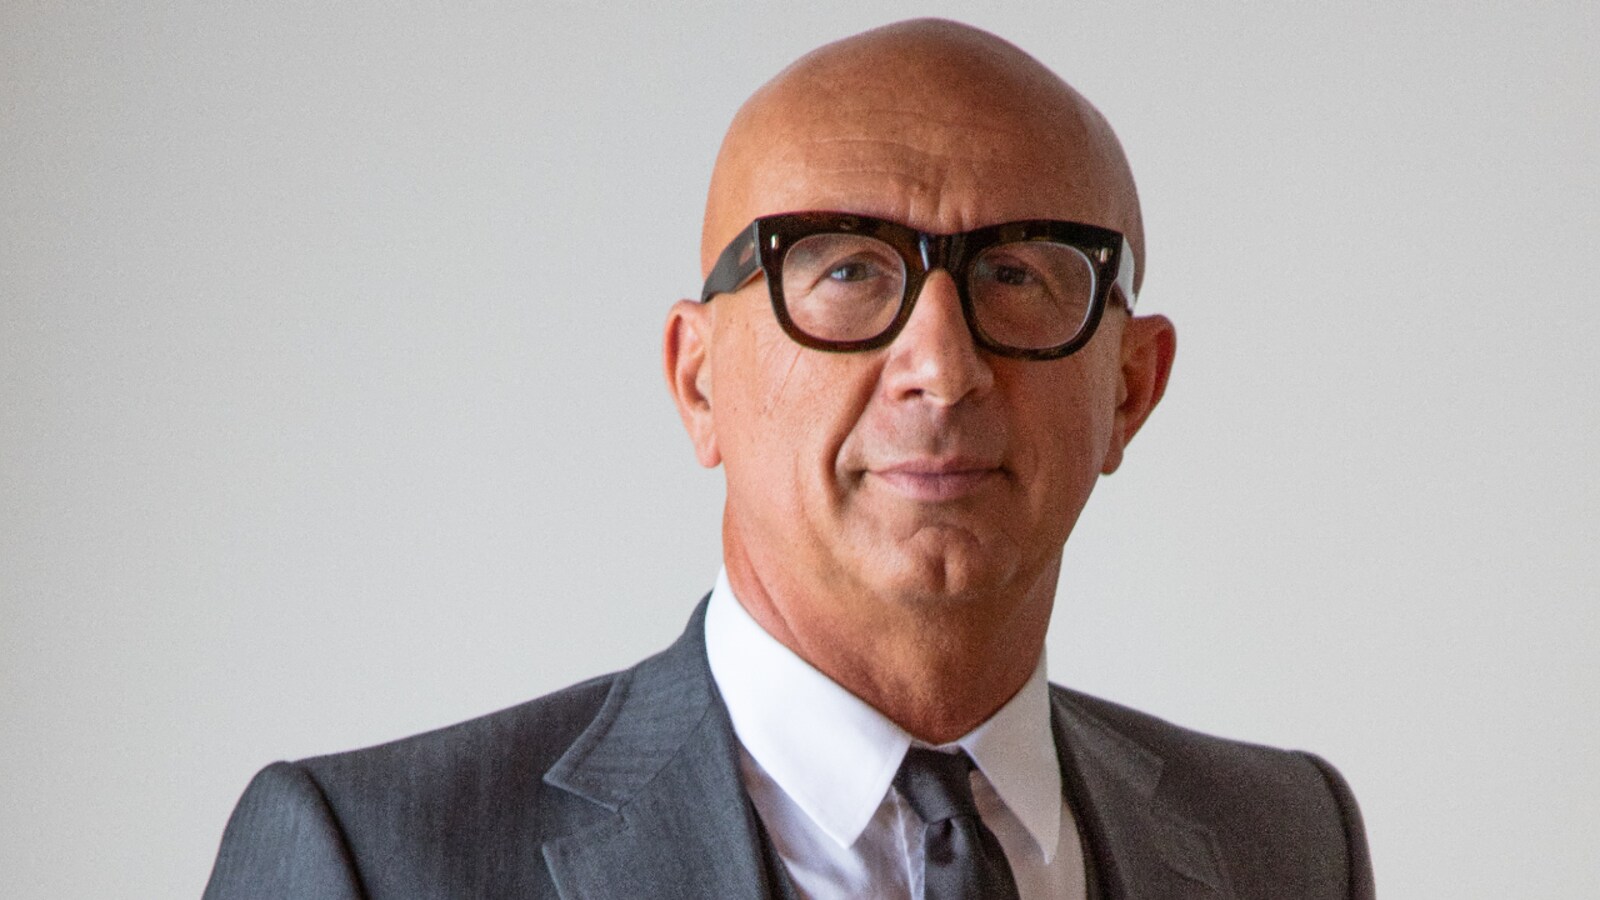 Gucci's President Marco Bizzarri Sees Brand Changes Driving Growth – WWD